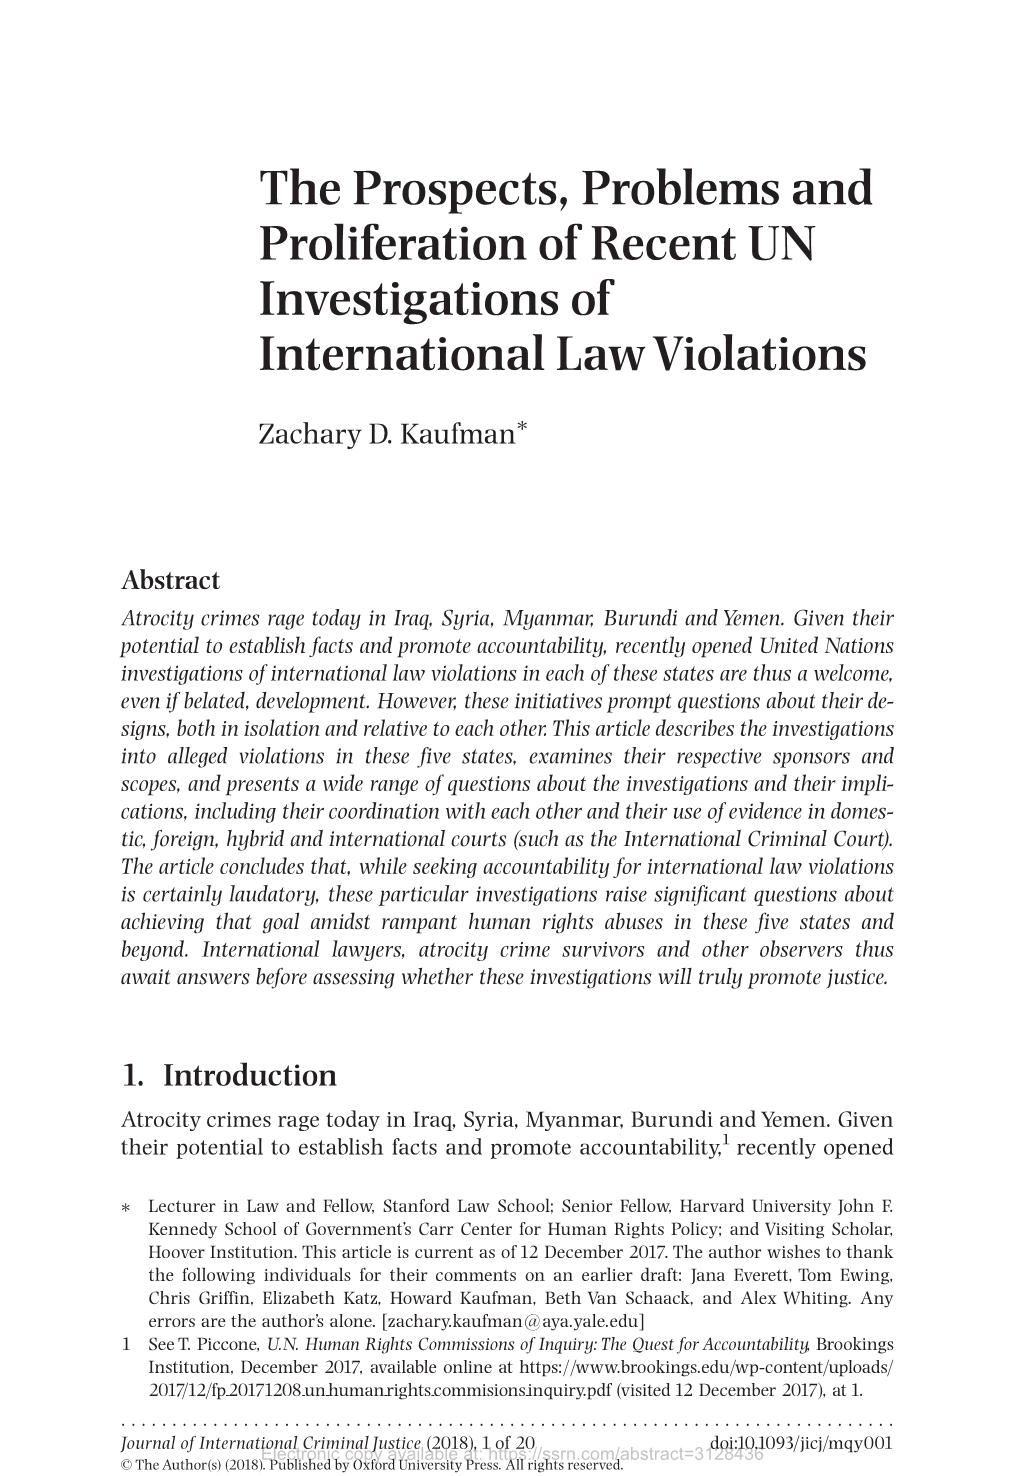 The Prospects, Problems and Proliferation of Recent UN Investigations of International Lawviolations